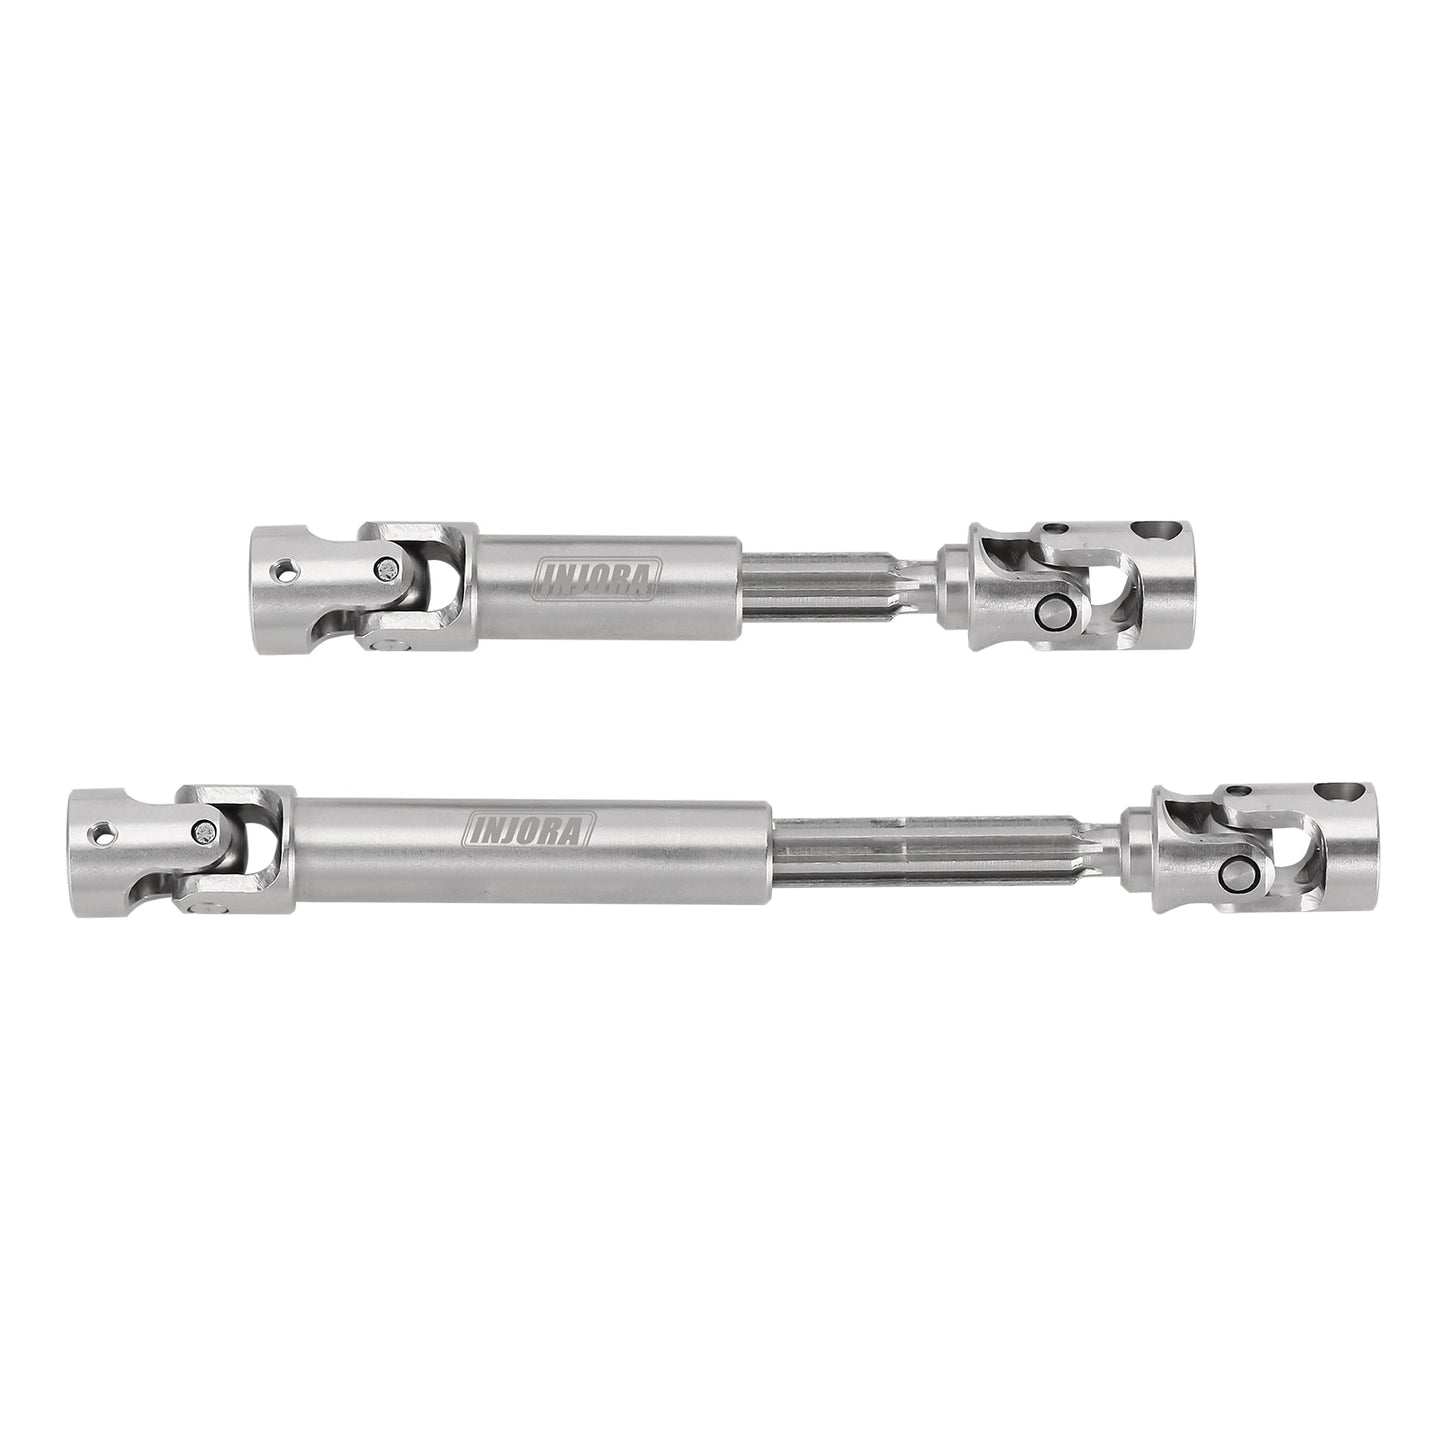 INJORA Stainless Steel Center Drive Shafts for 1/18 RC Crawler TRX4M Upgrade (4M-18)